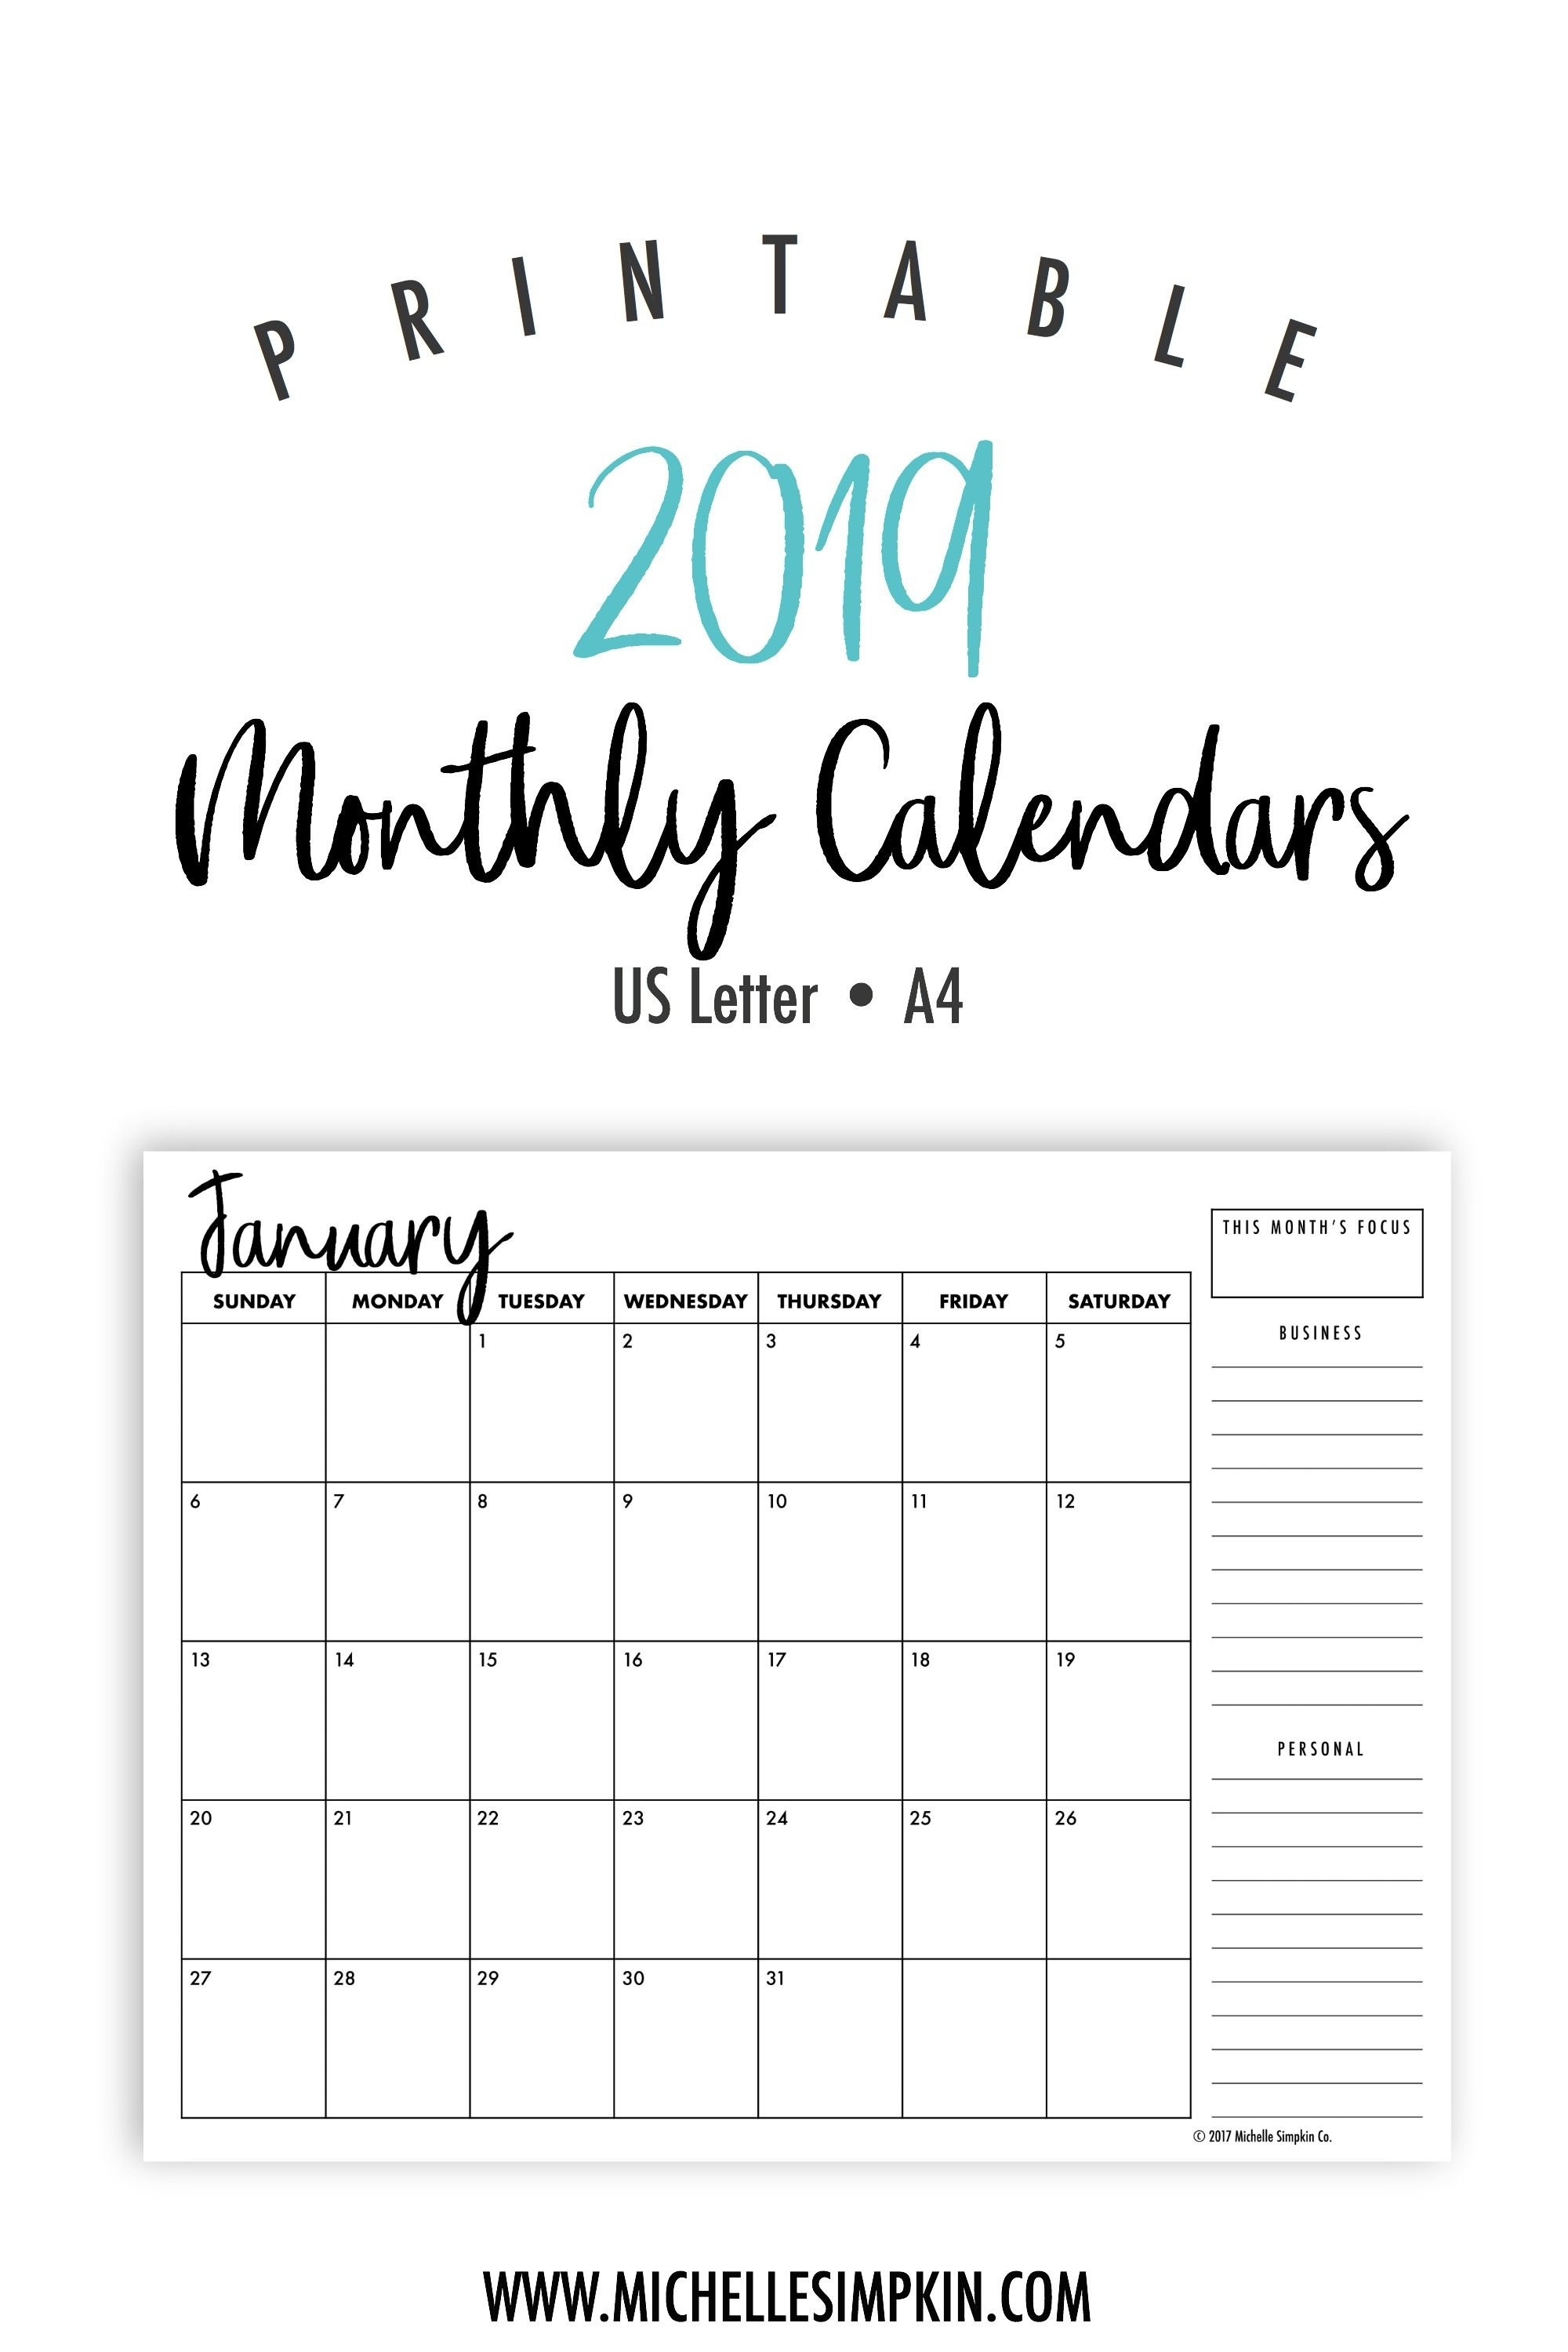 2019 Printable Calendars - Plan Out Next Year With These Ink Impressive Free Printable Calendars Hong Kong